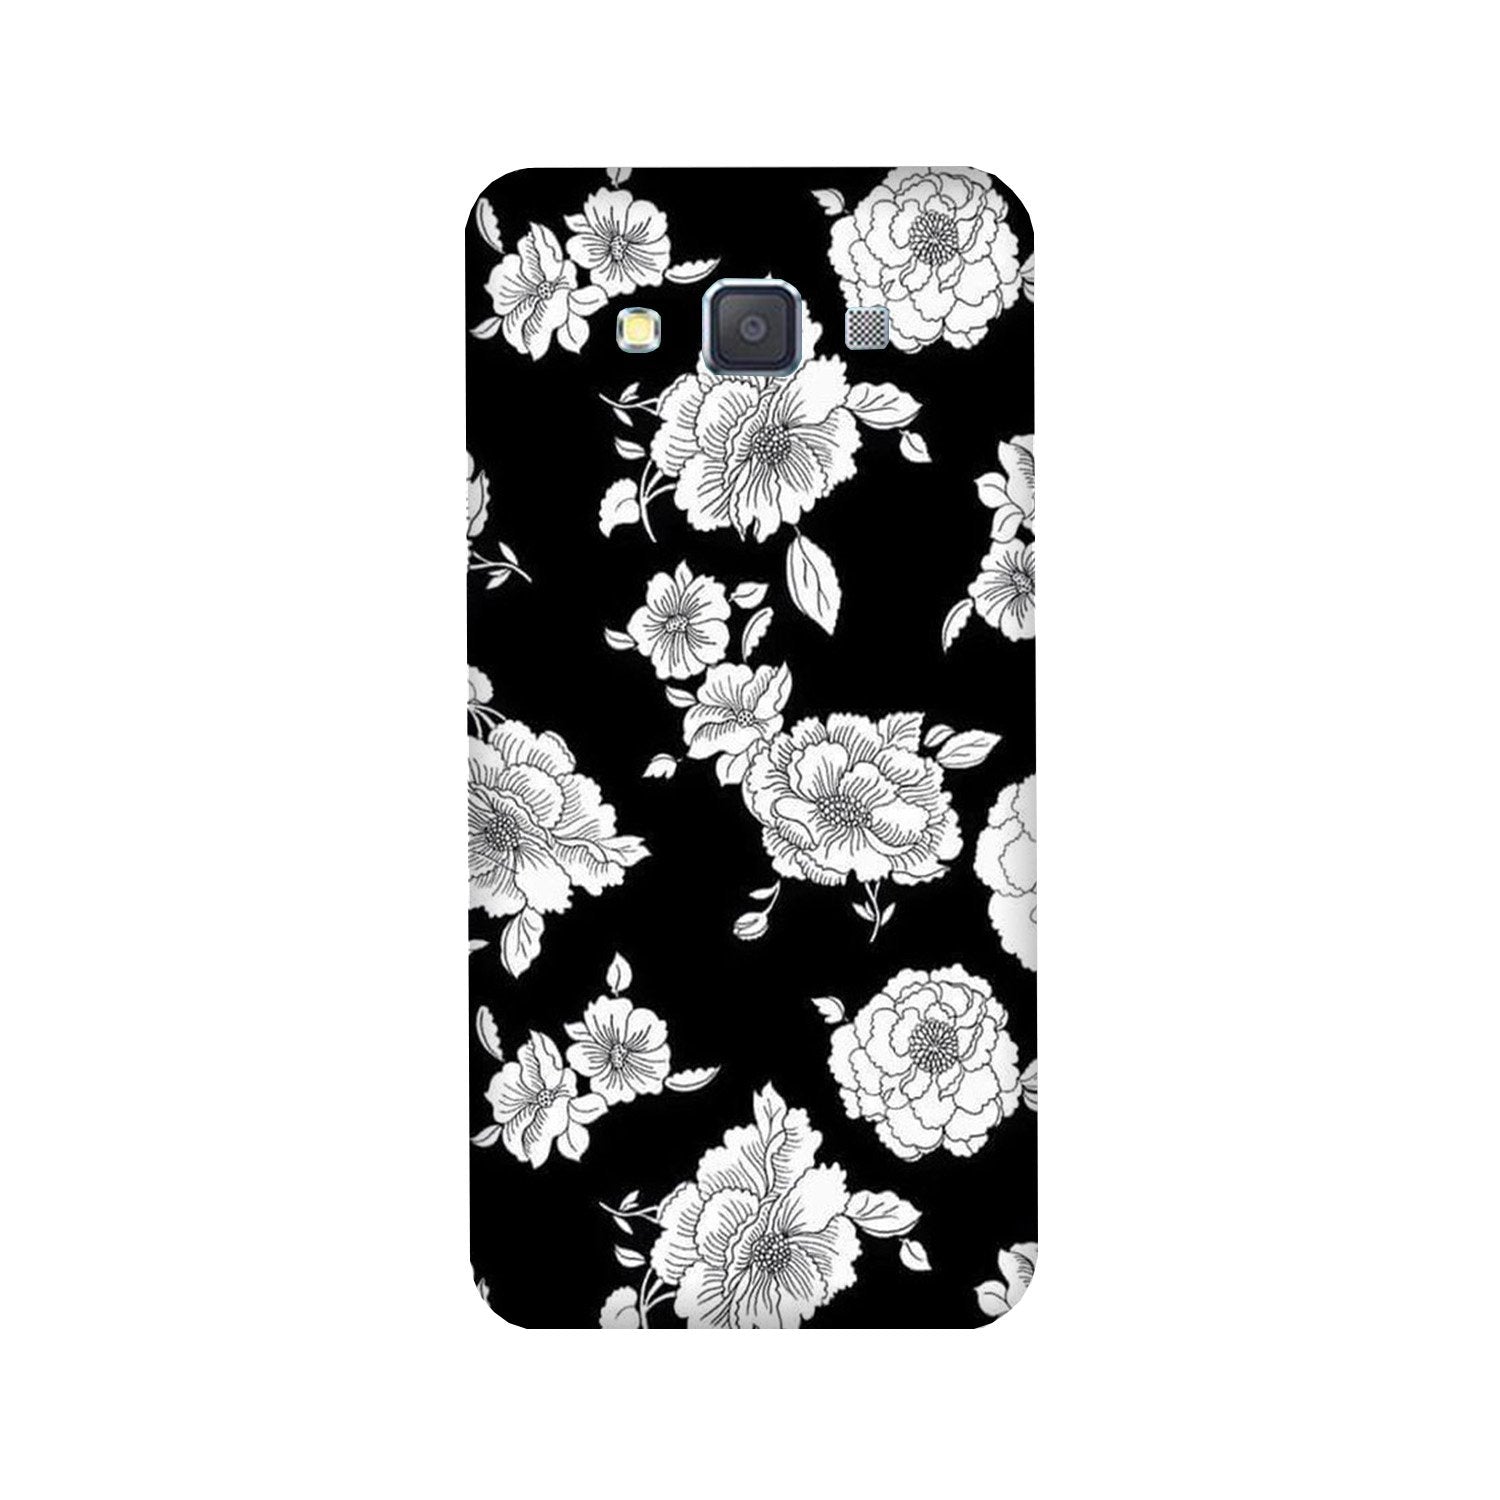 White flowers Black Background Case for Galaxy A5 (2015)